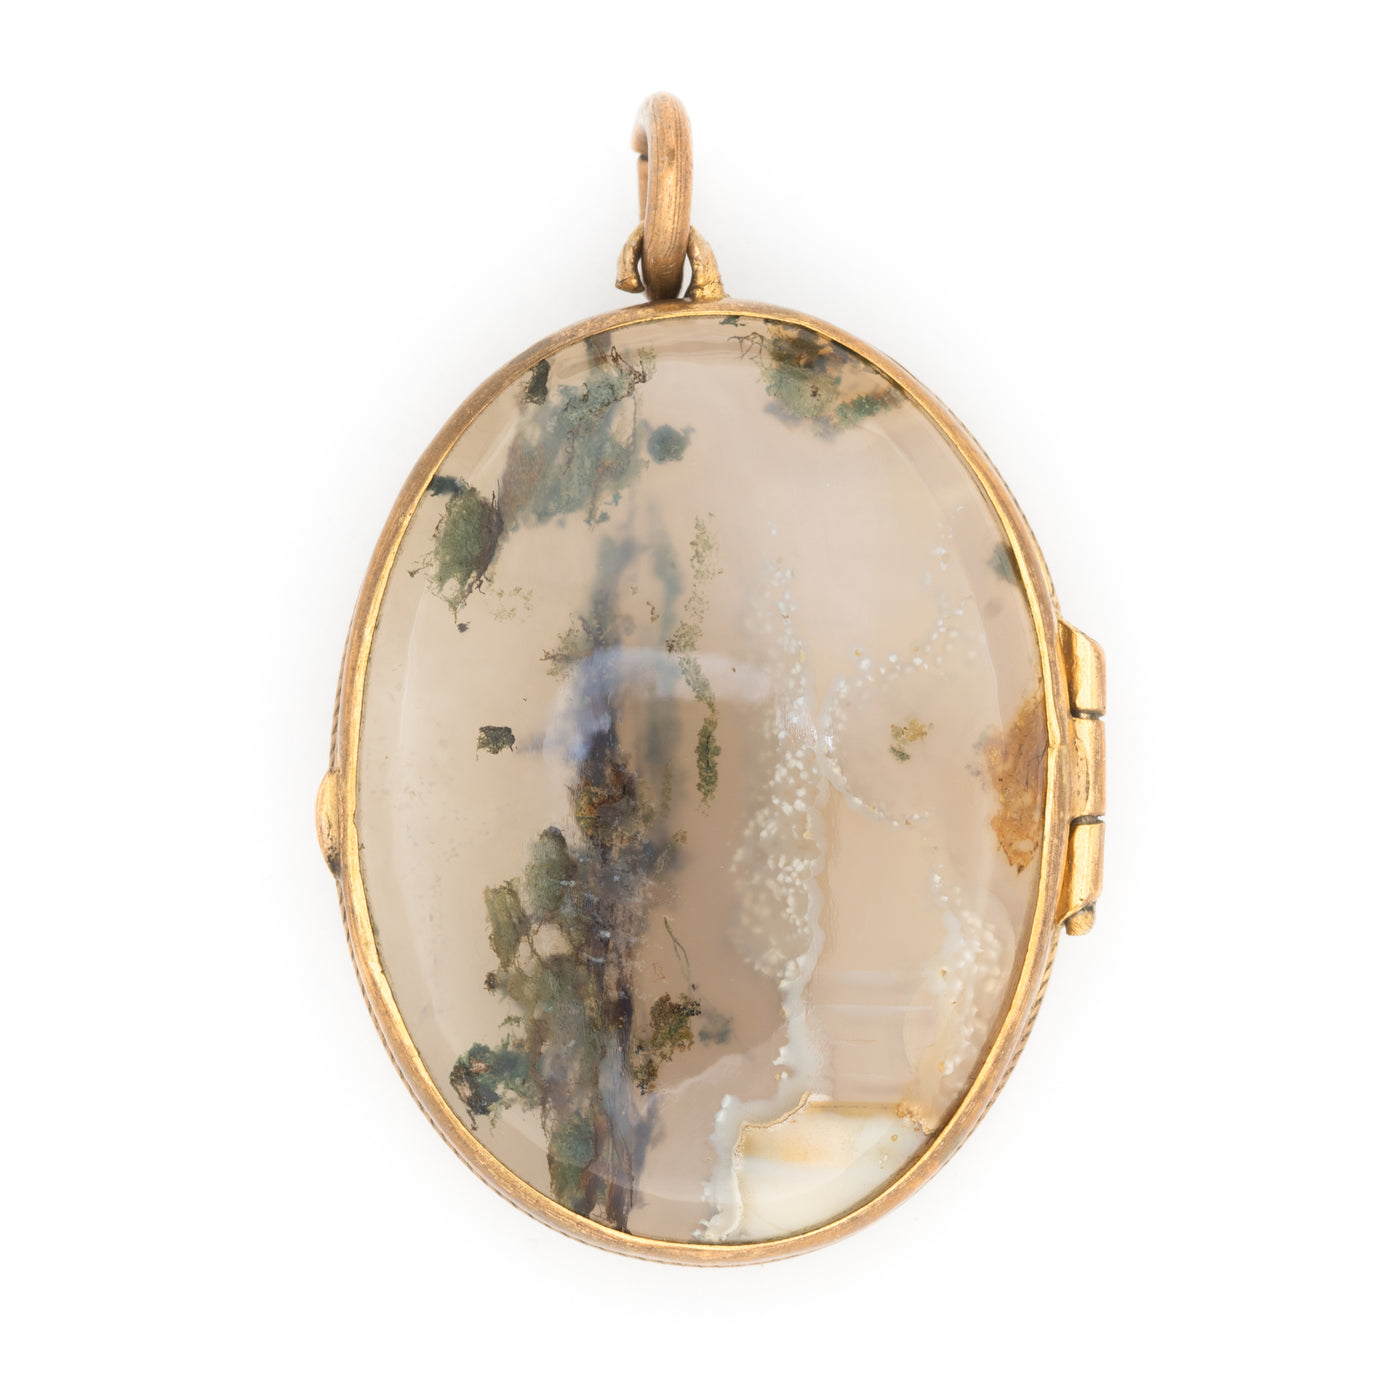 VICTORIAN 15K YELLOW GOLD, SCOTTISH AGATE AND ROCK CRYSTAL LOCKET LATE 1800s